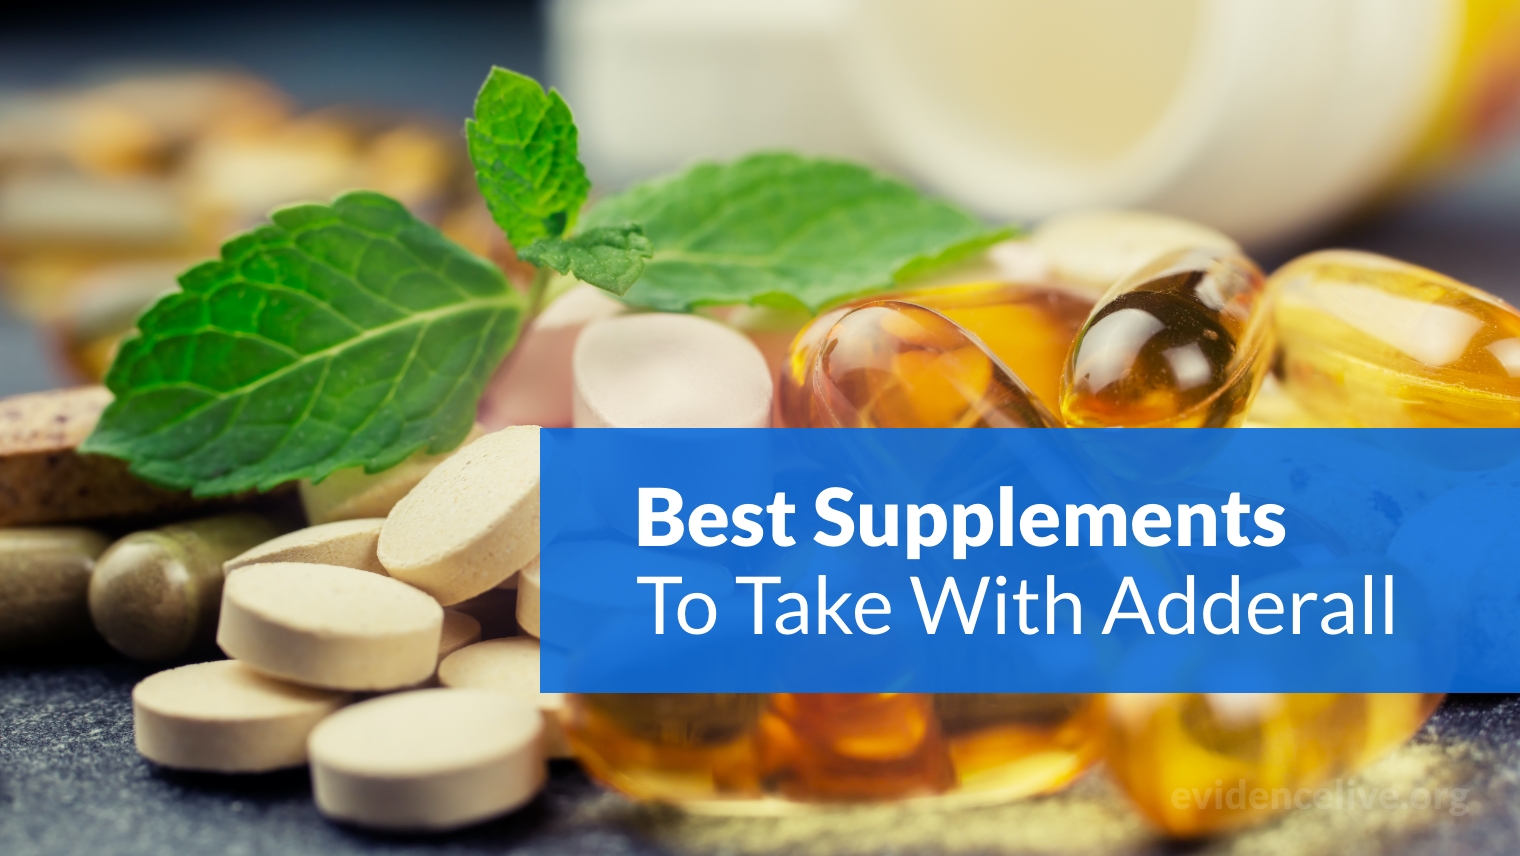 Best Supplements To Take With Adderall For Improving Its Effects